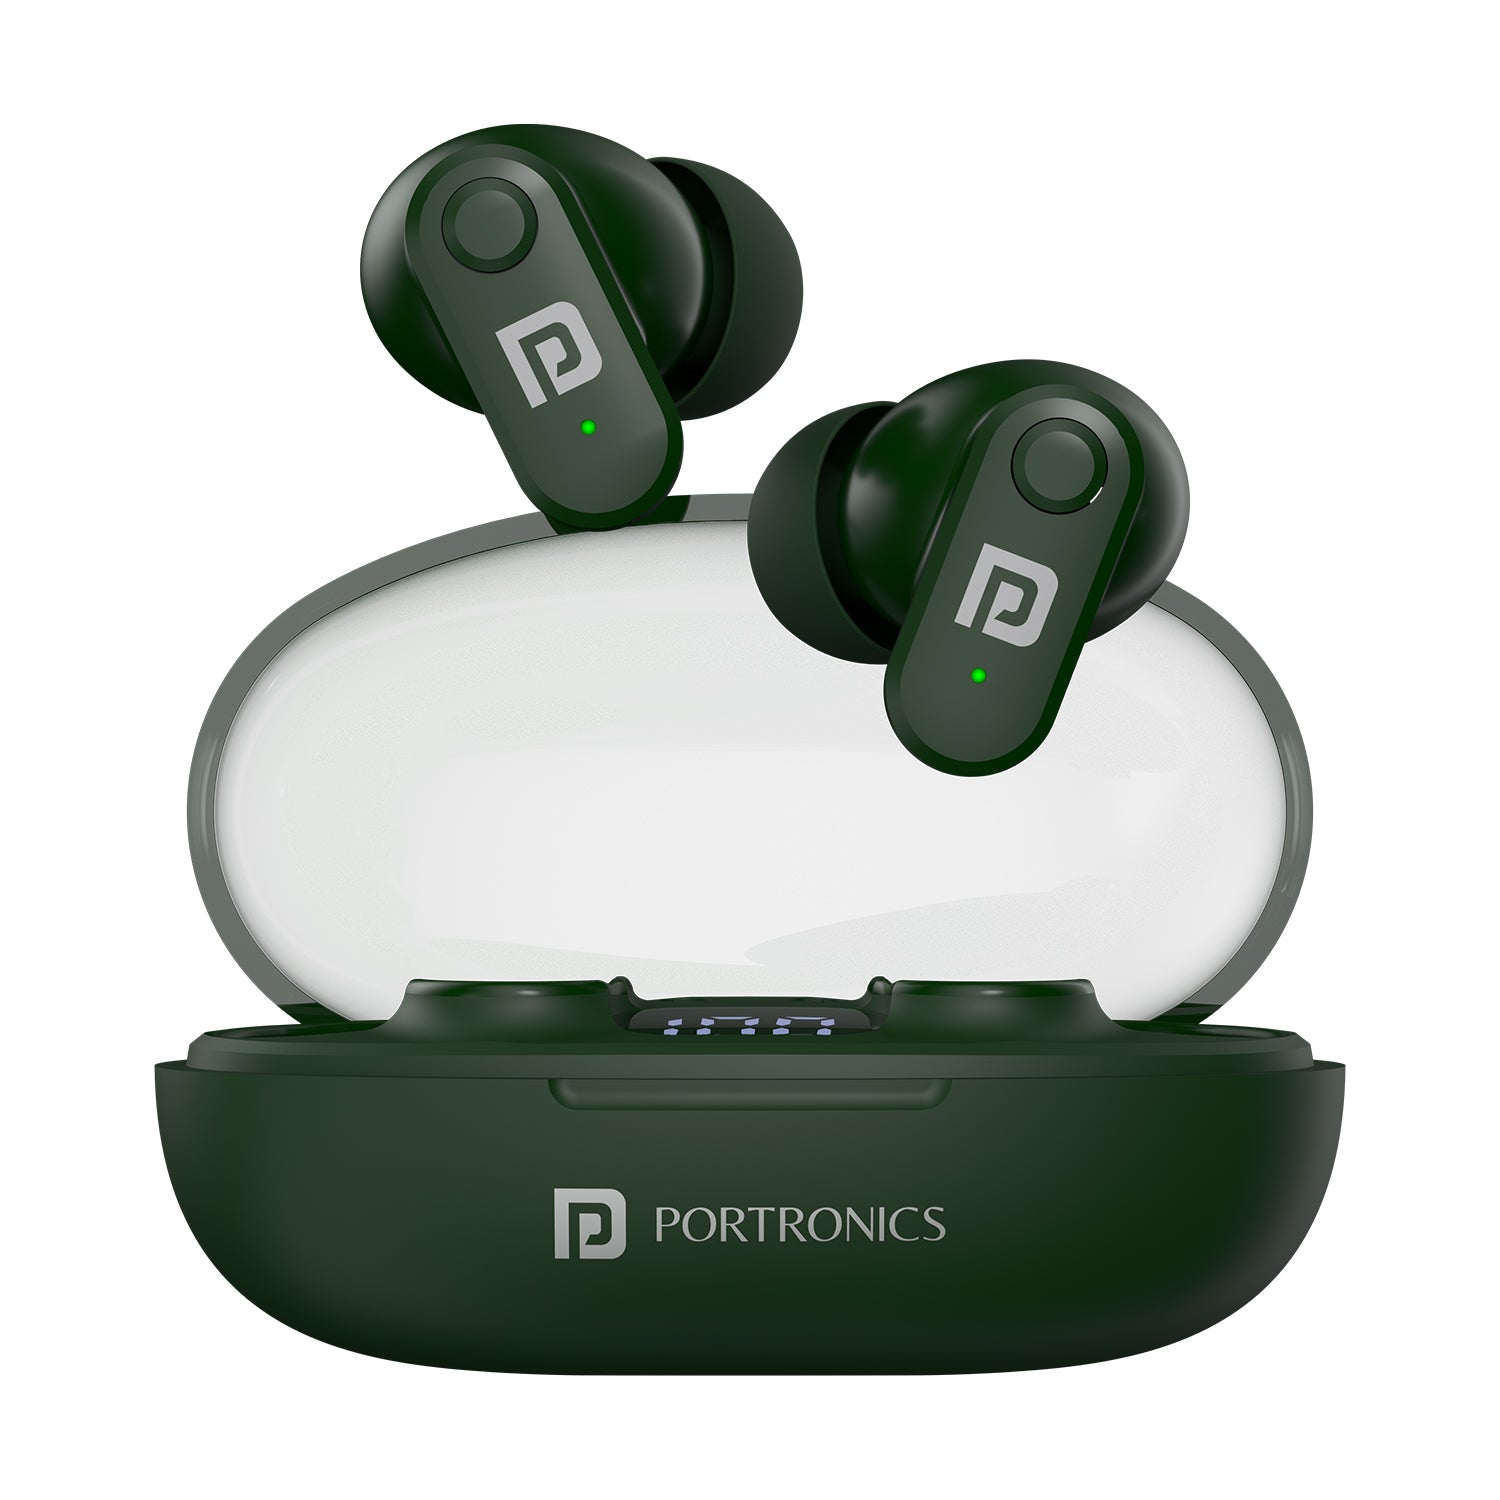 Portronics Harmonics Twins s16 Smart wireless TWS earbuds| earbuds with noise cancelling online